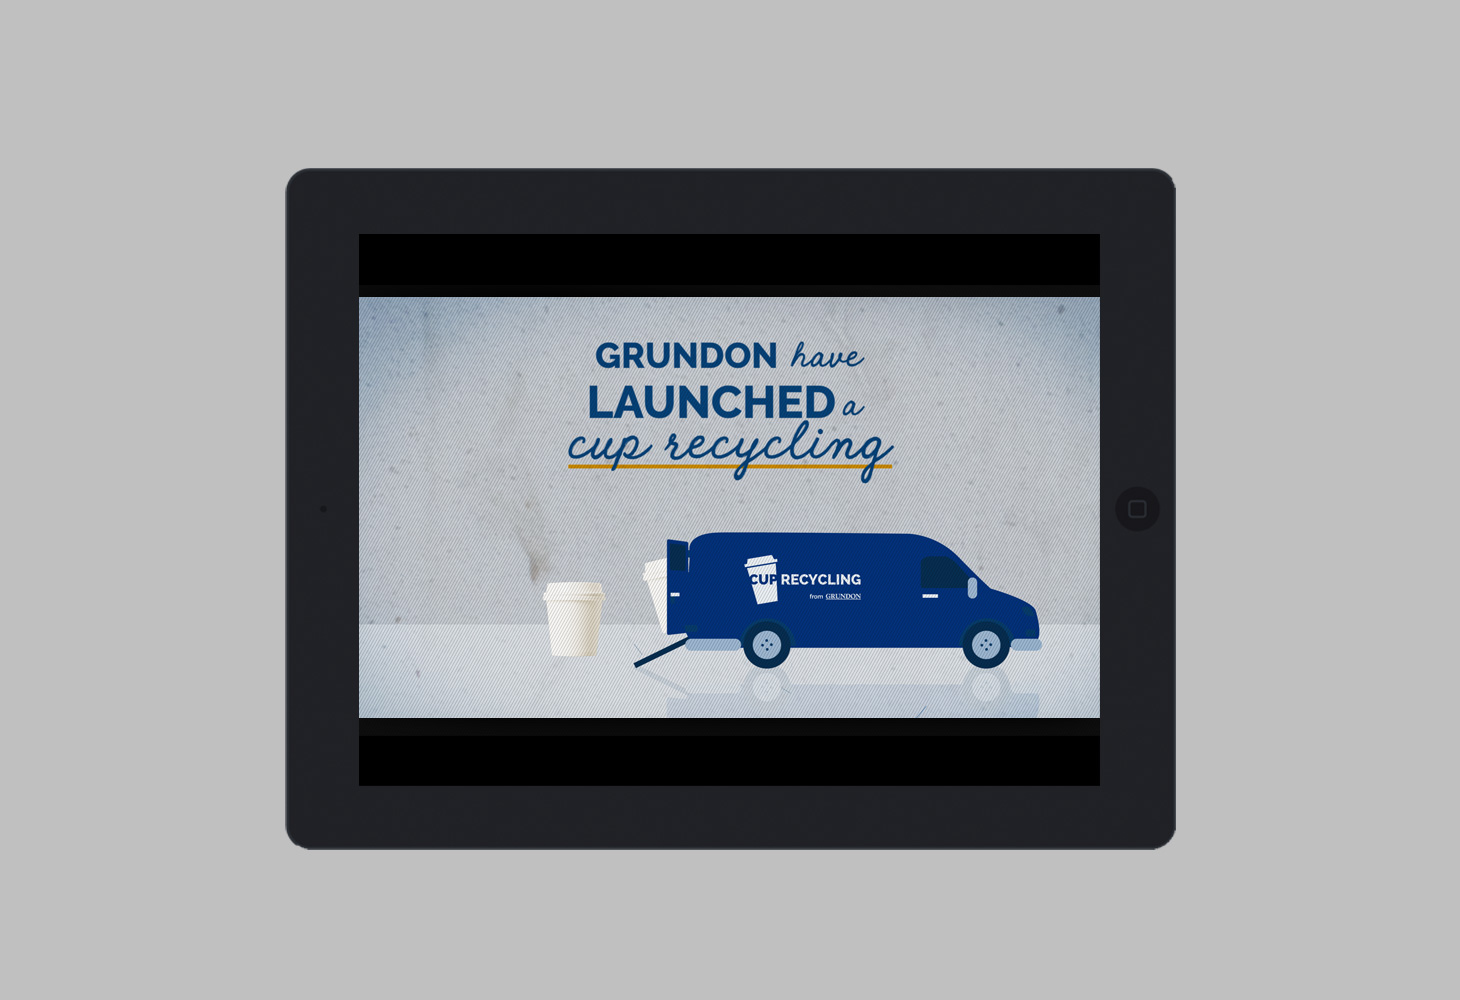 Grundon - Recycling Cups - New service launced